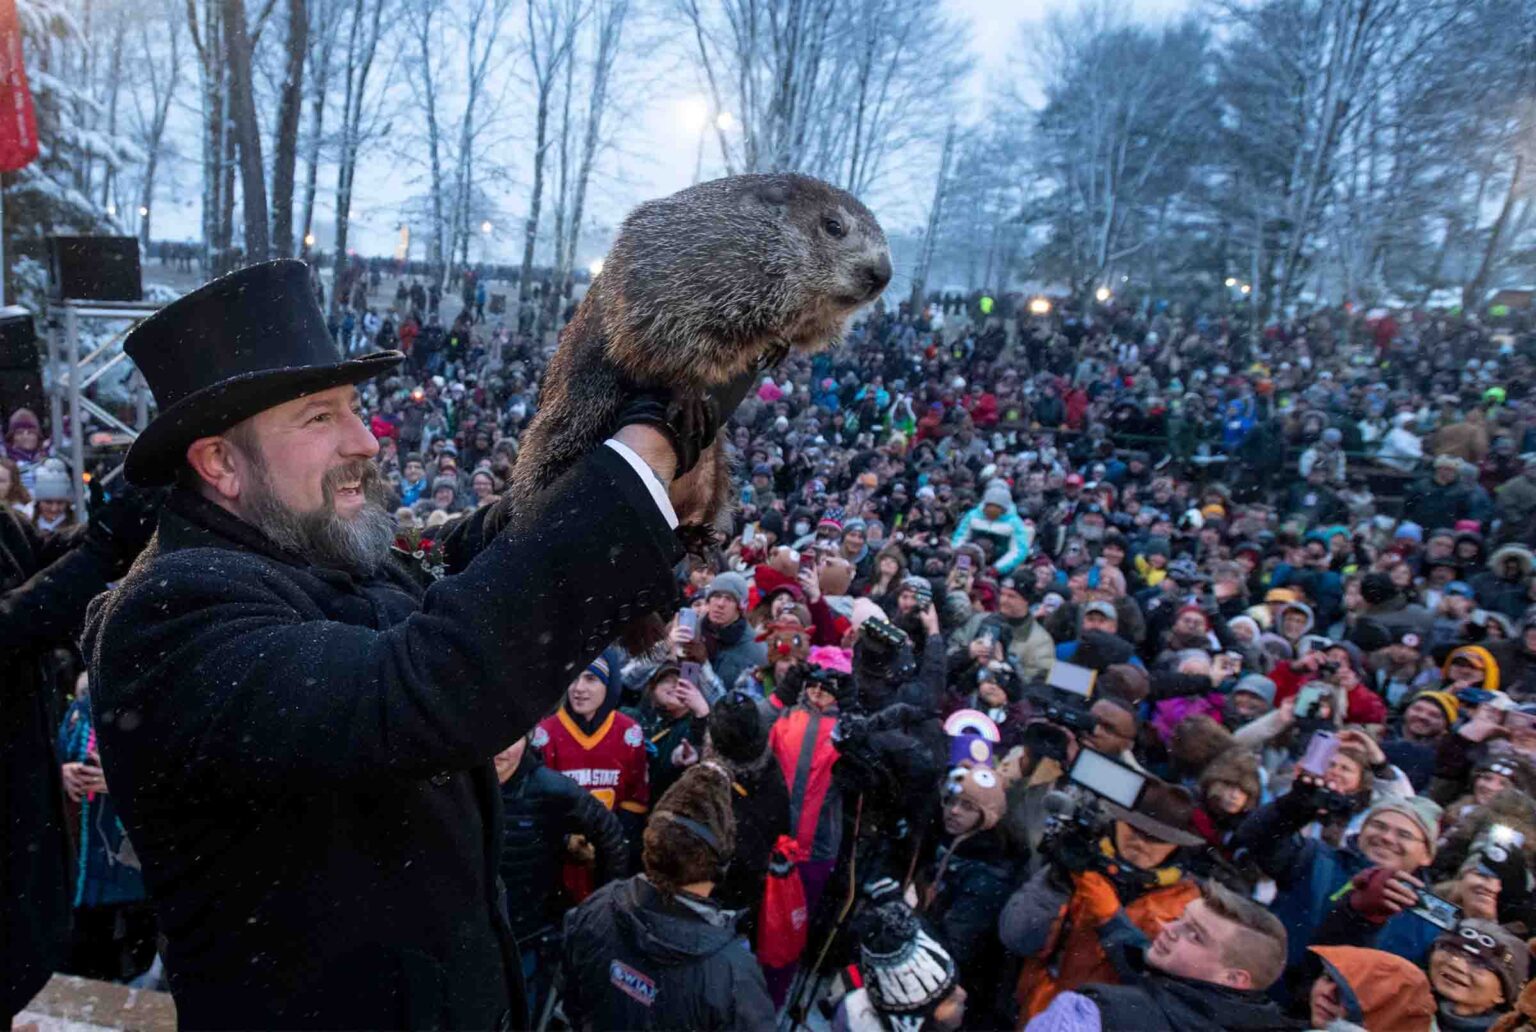 It's Groundhog day! In order to celebrate this funny holiday we've compiled the best Punxsutawney Phil memes.